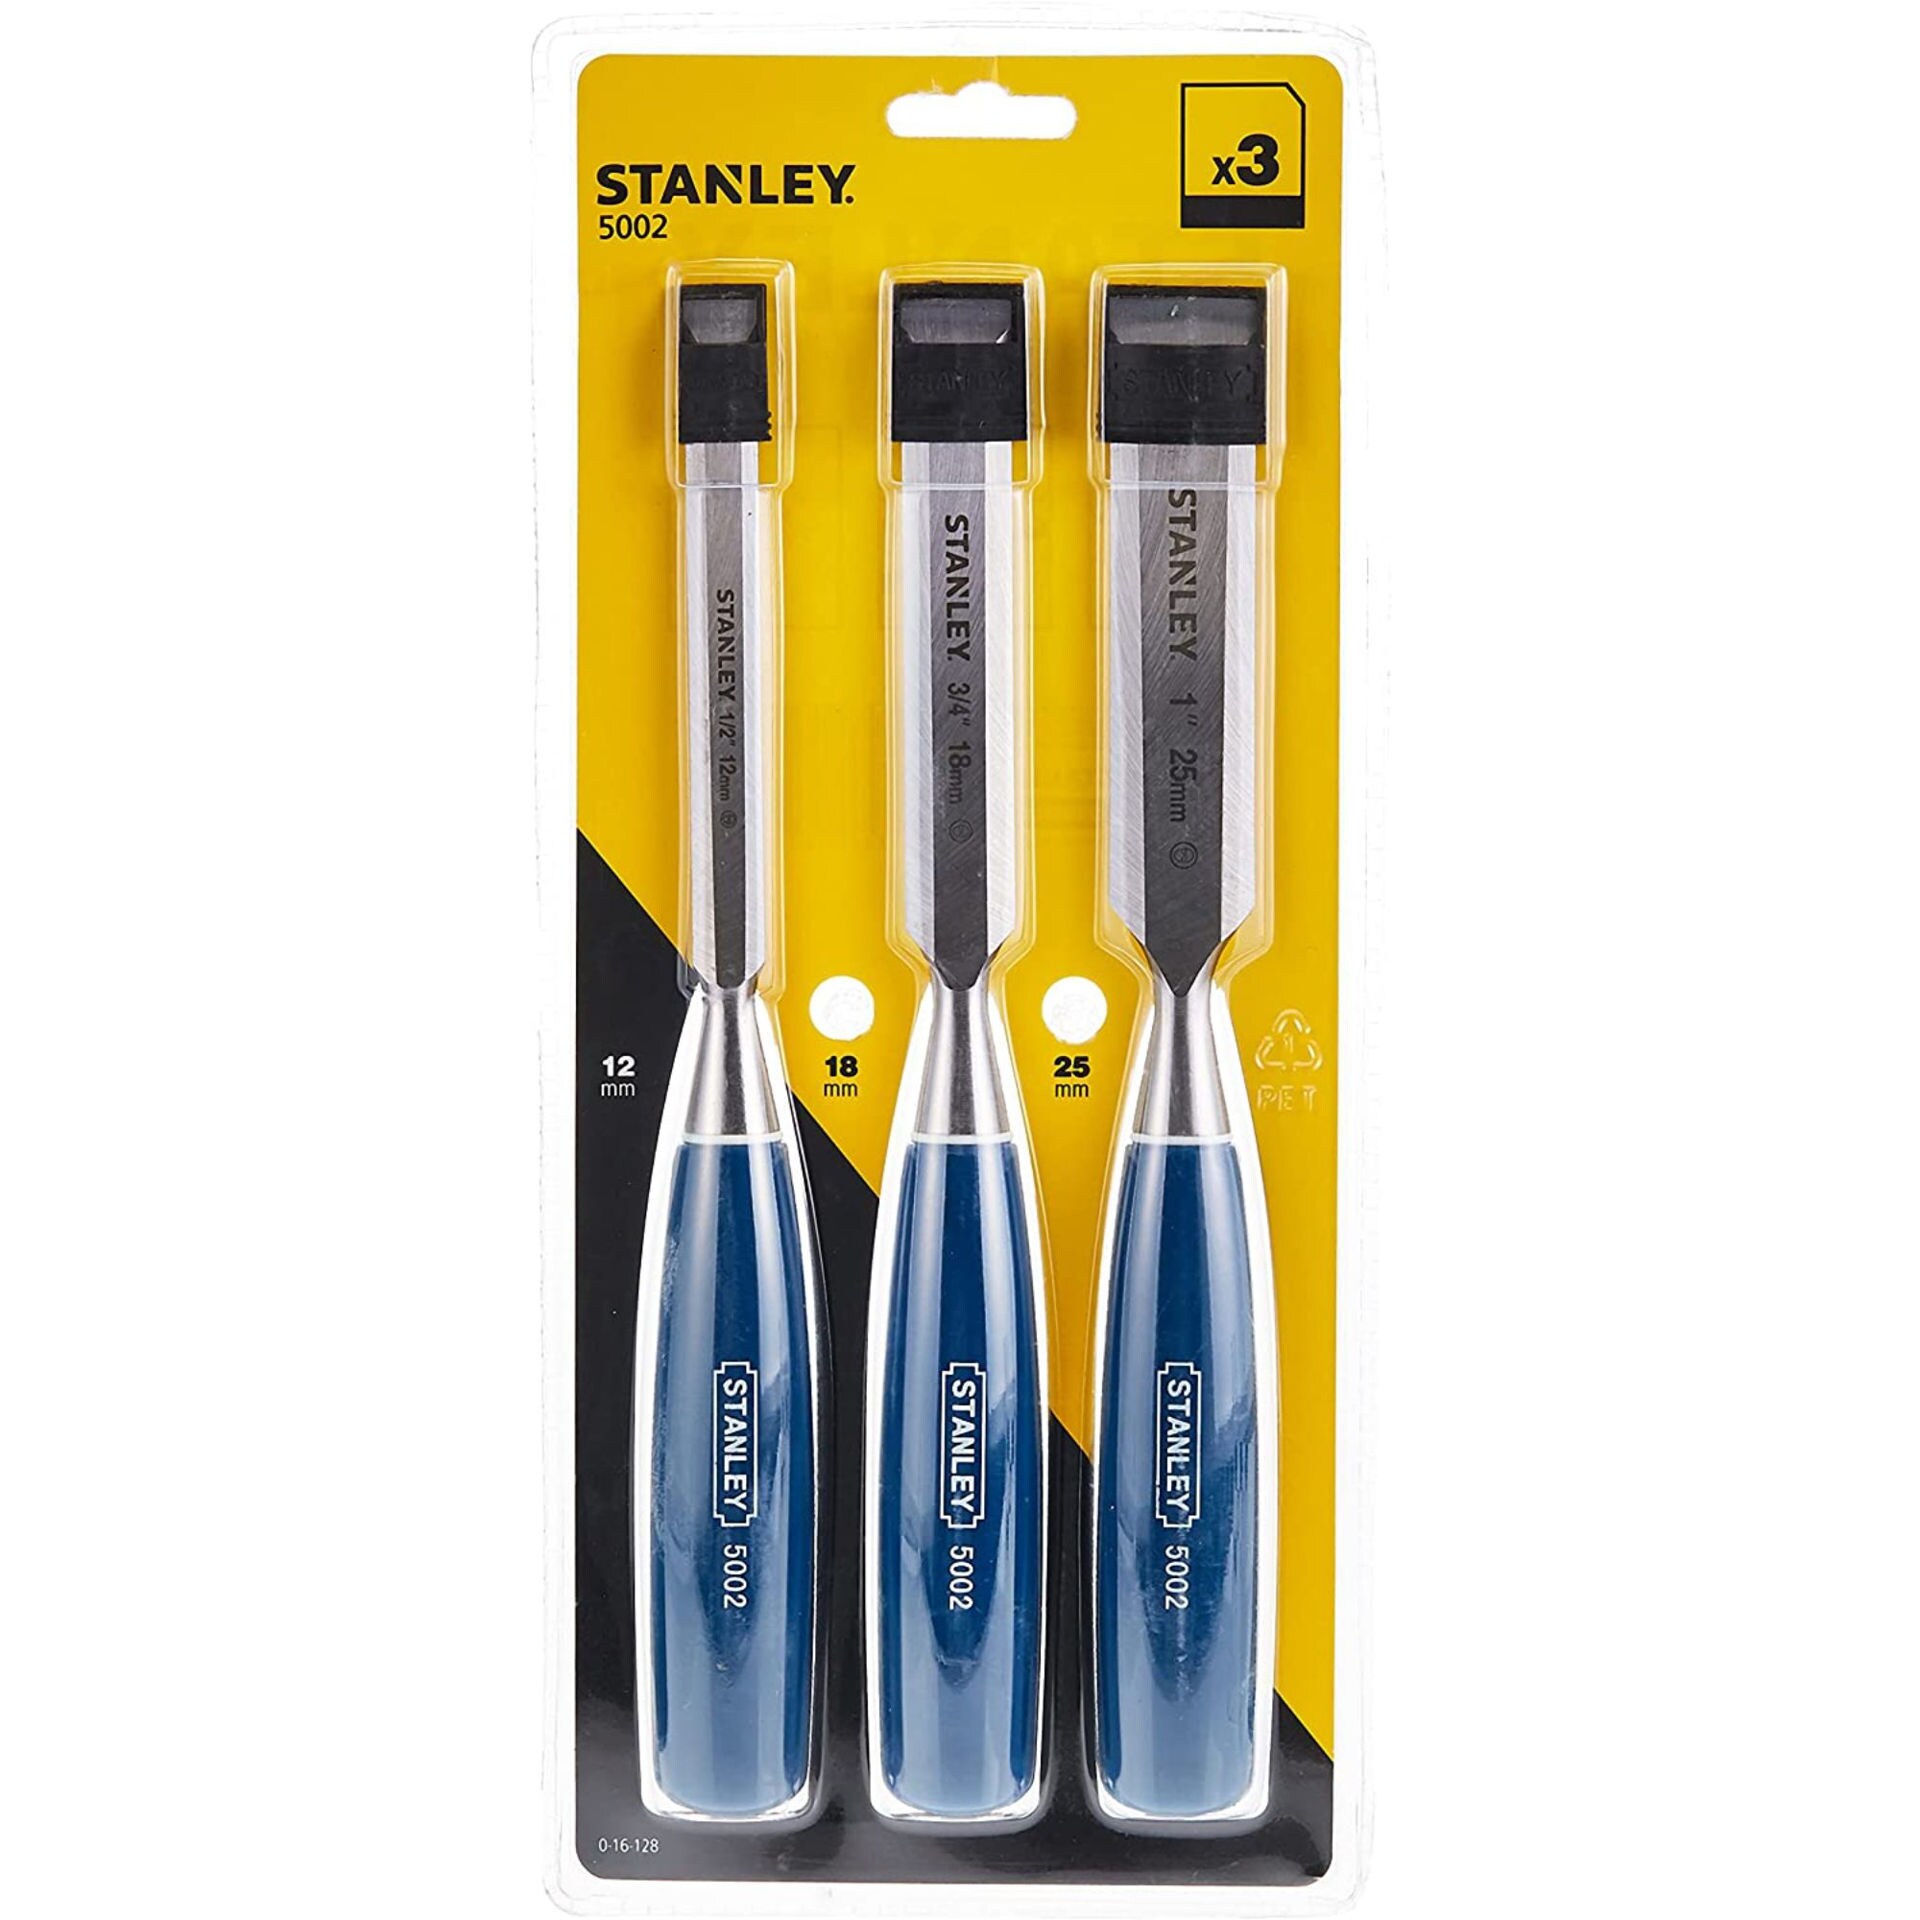 Stanley 5002 Bevel Edge Chisels with Blue Handle Set, Pack of 3pcs